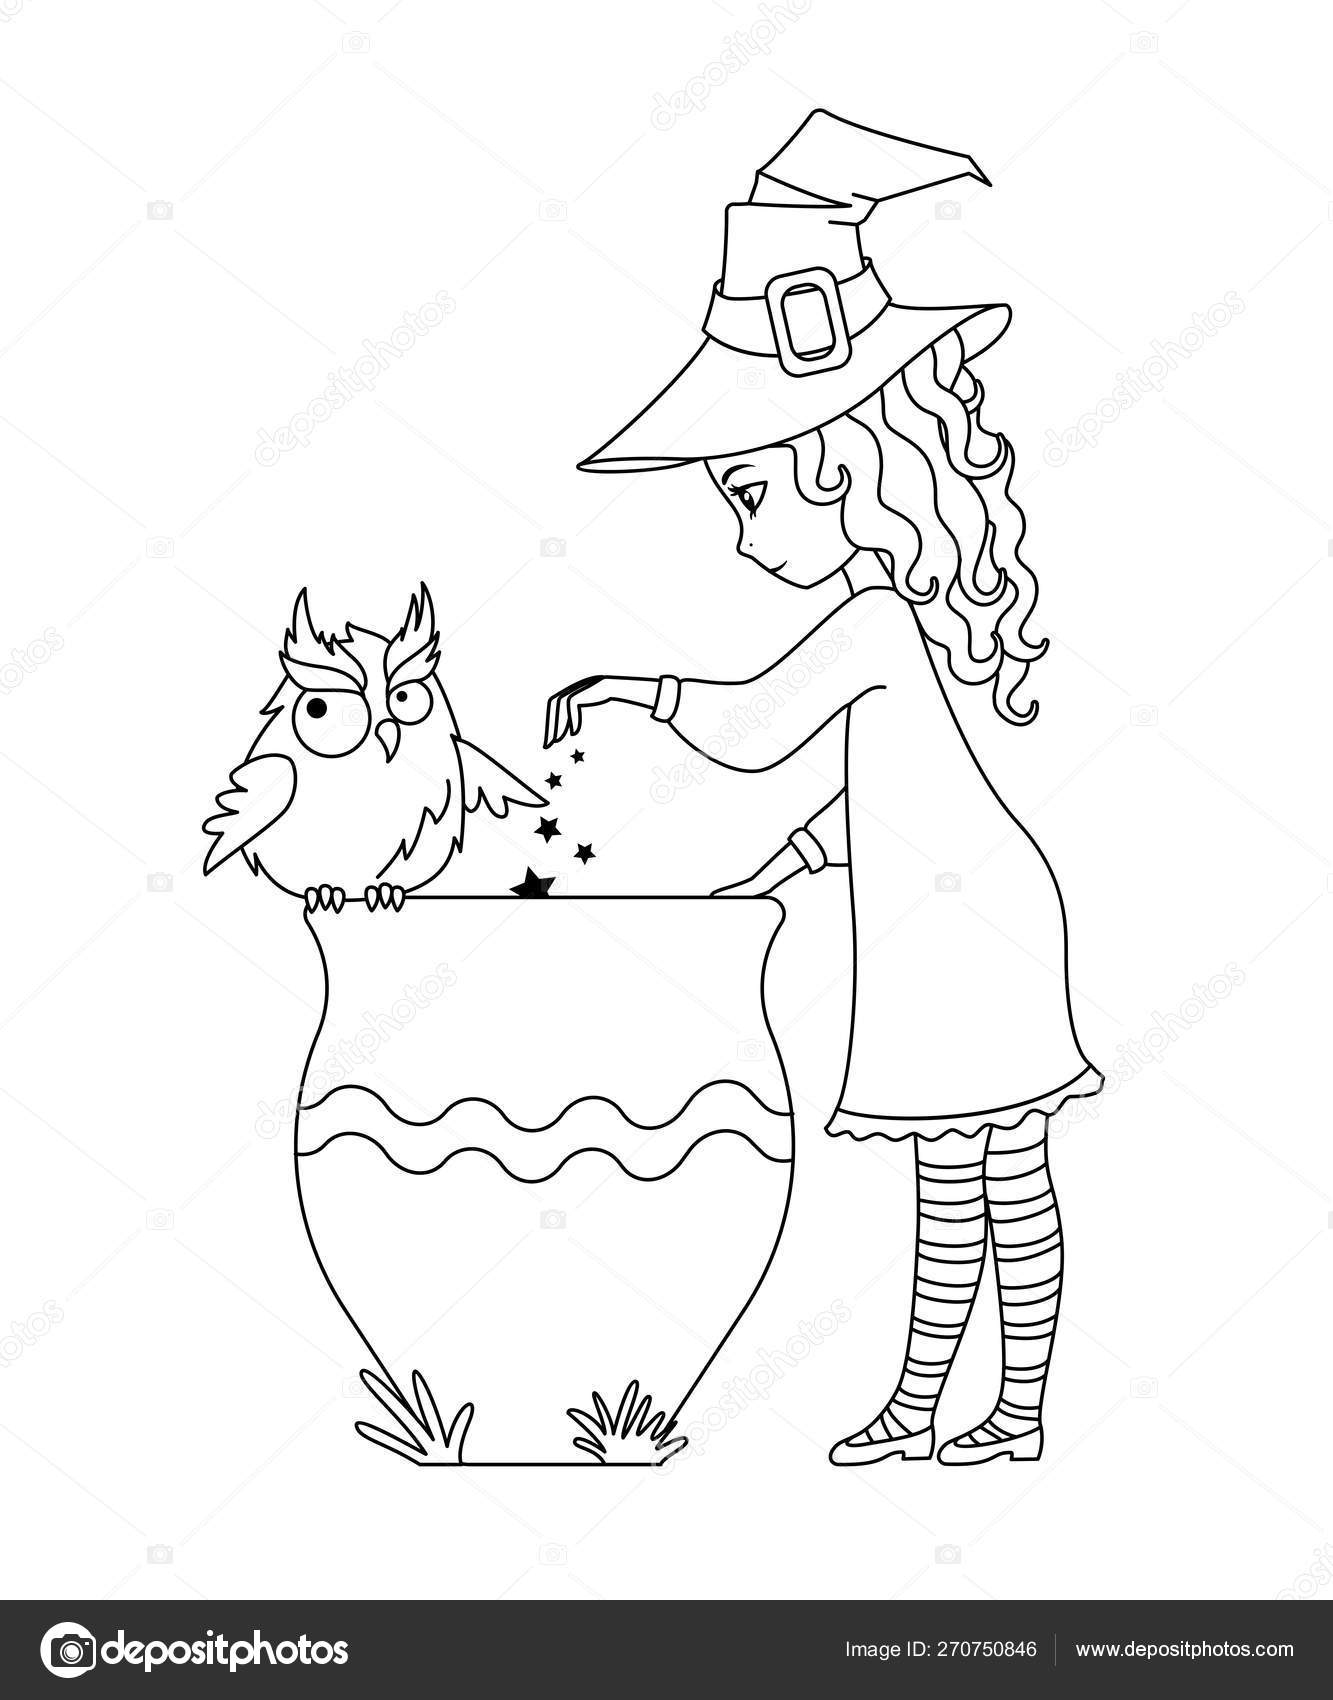 Coloring page witch with a cauldron and owl stock vector by blackspring